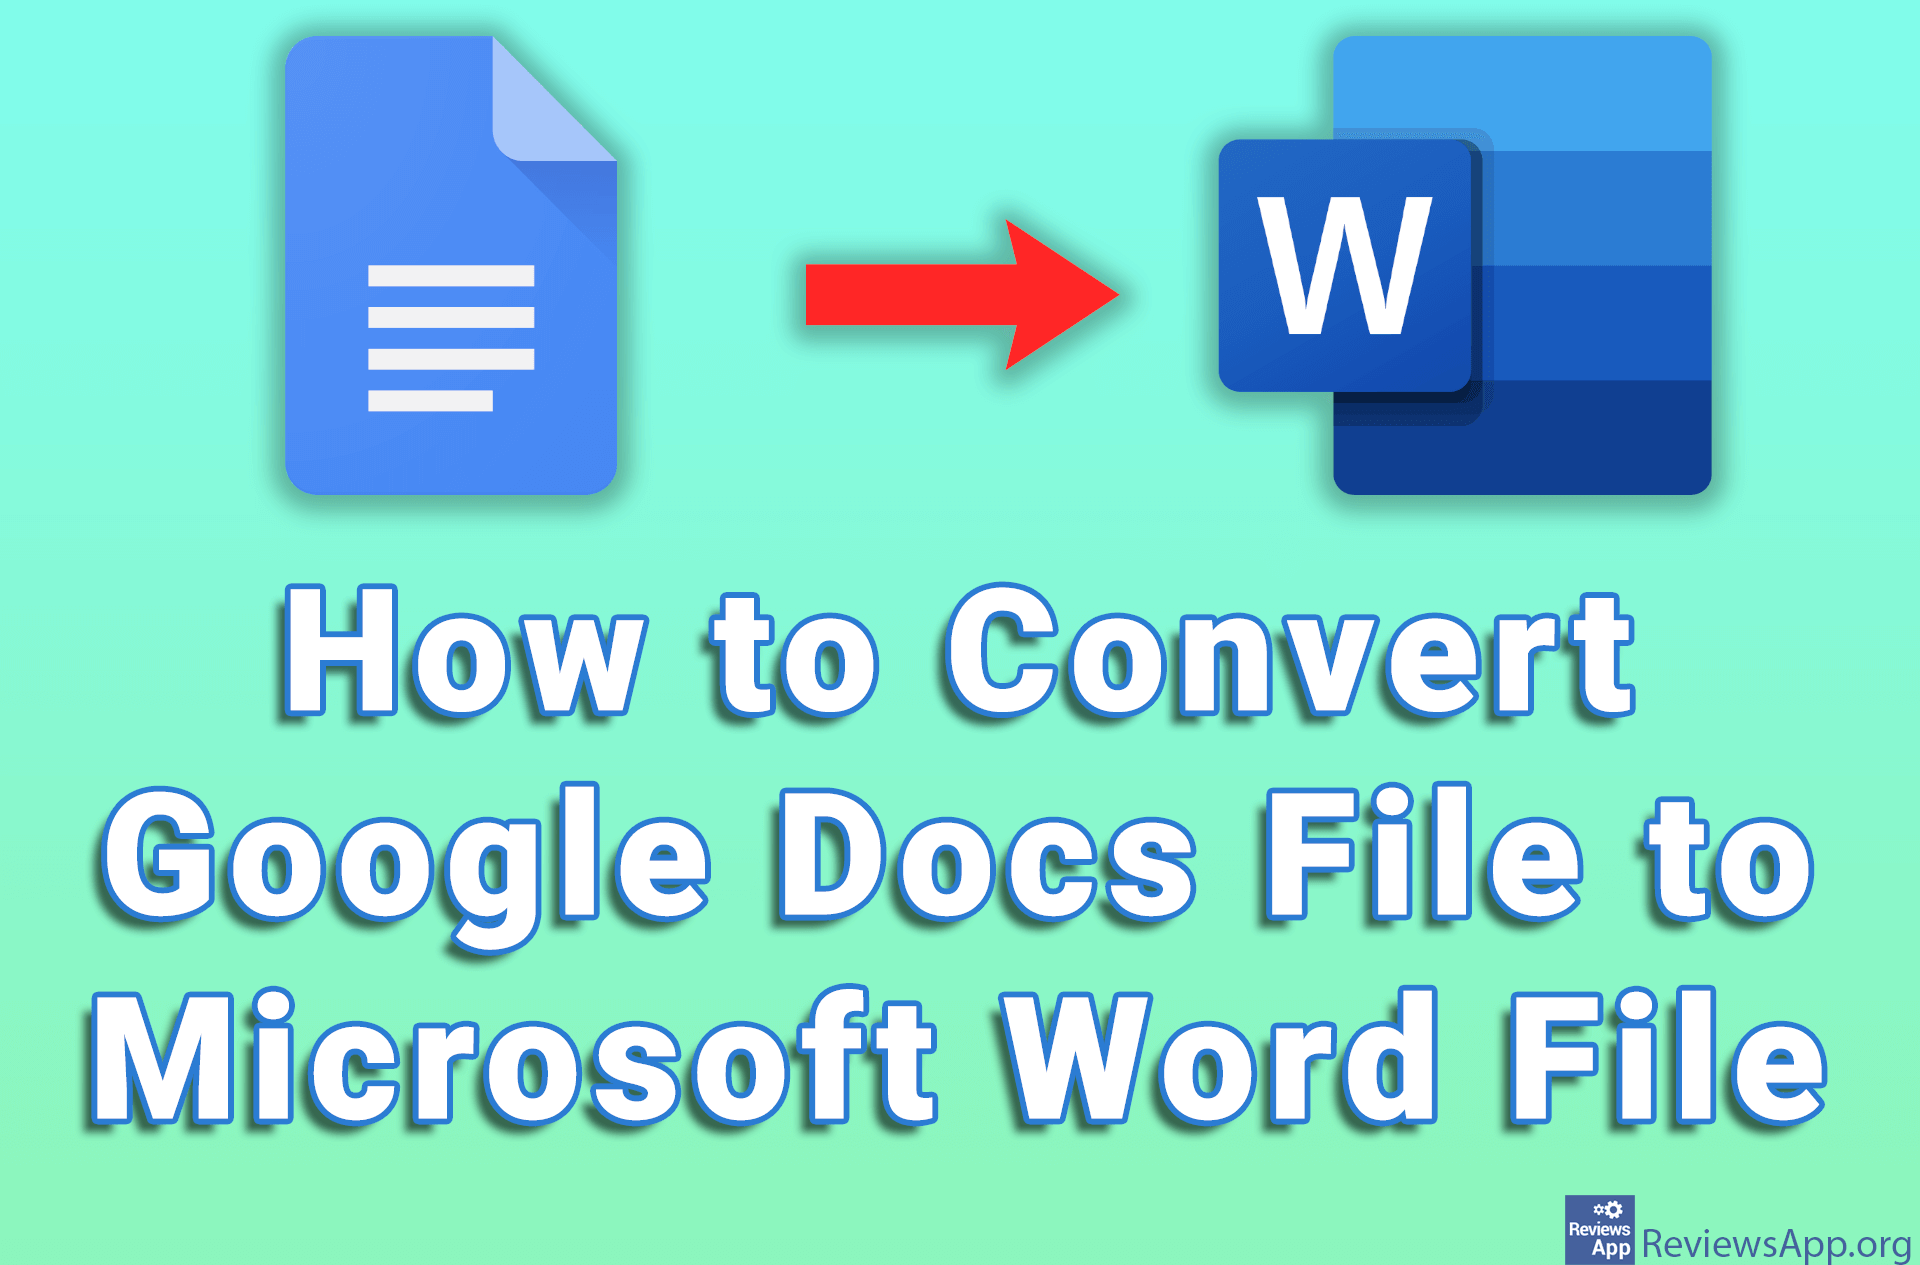 How to Convert Google Docs File to Microsoft Word File